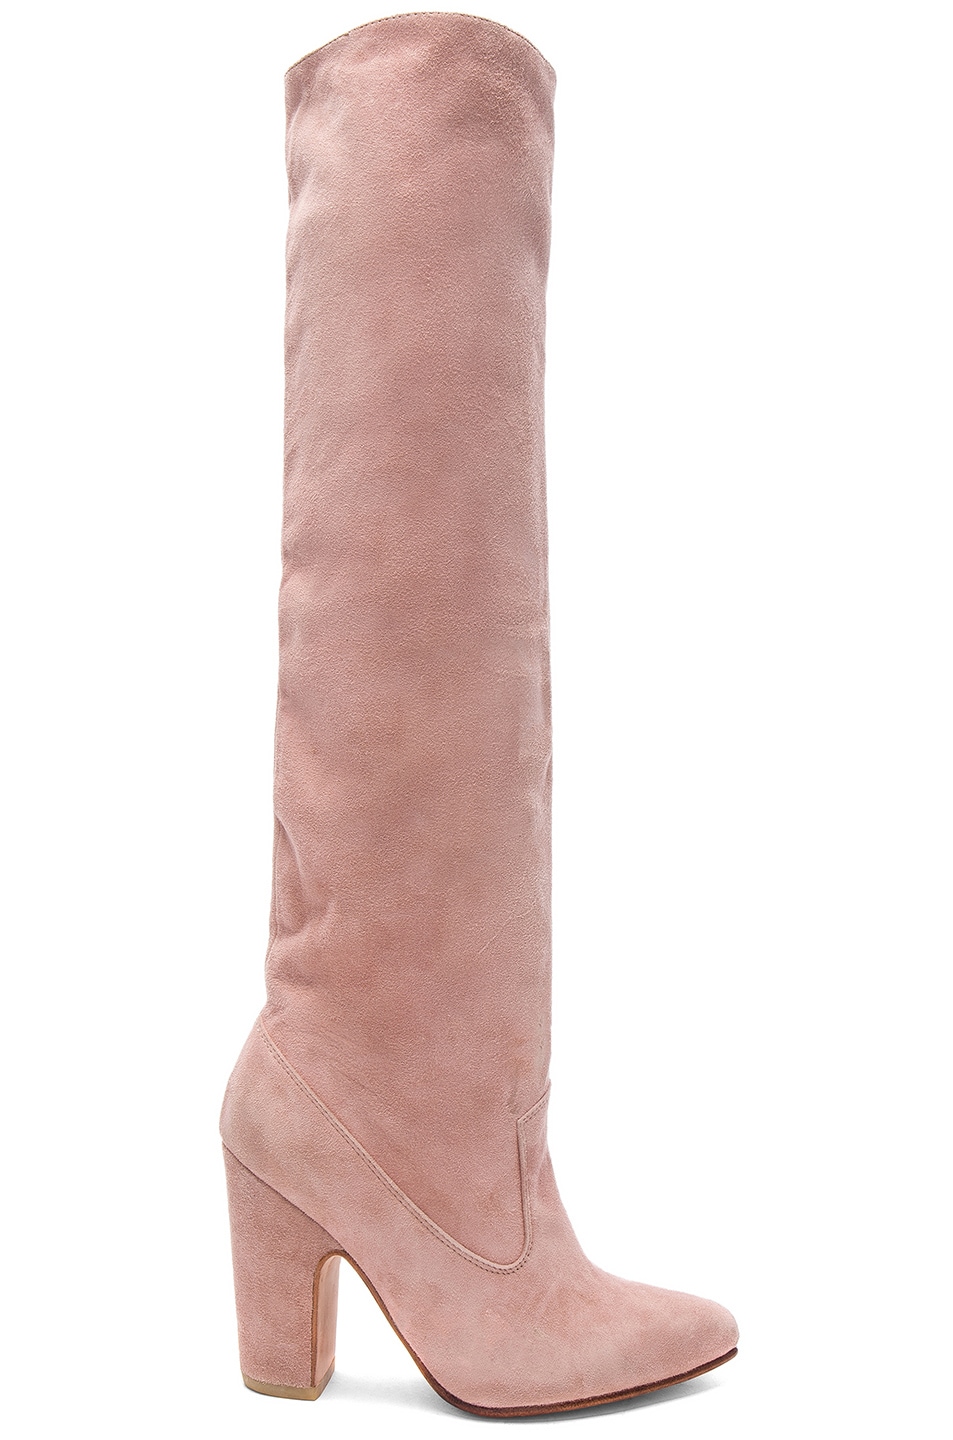 Image 1 of Ulla Johnson Suede Sloane Boots in Rose Suede